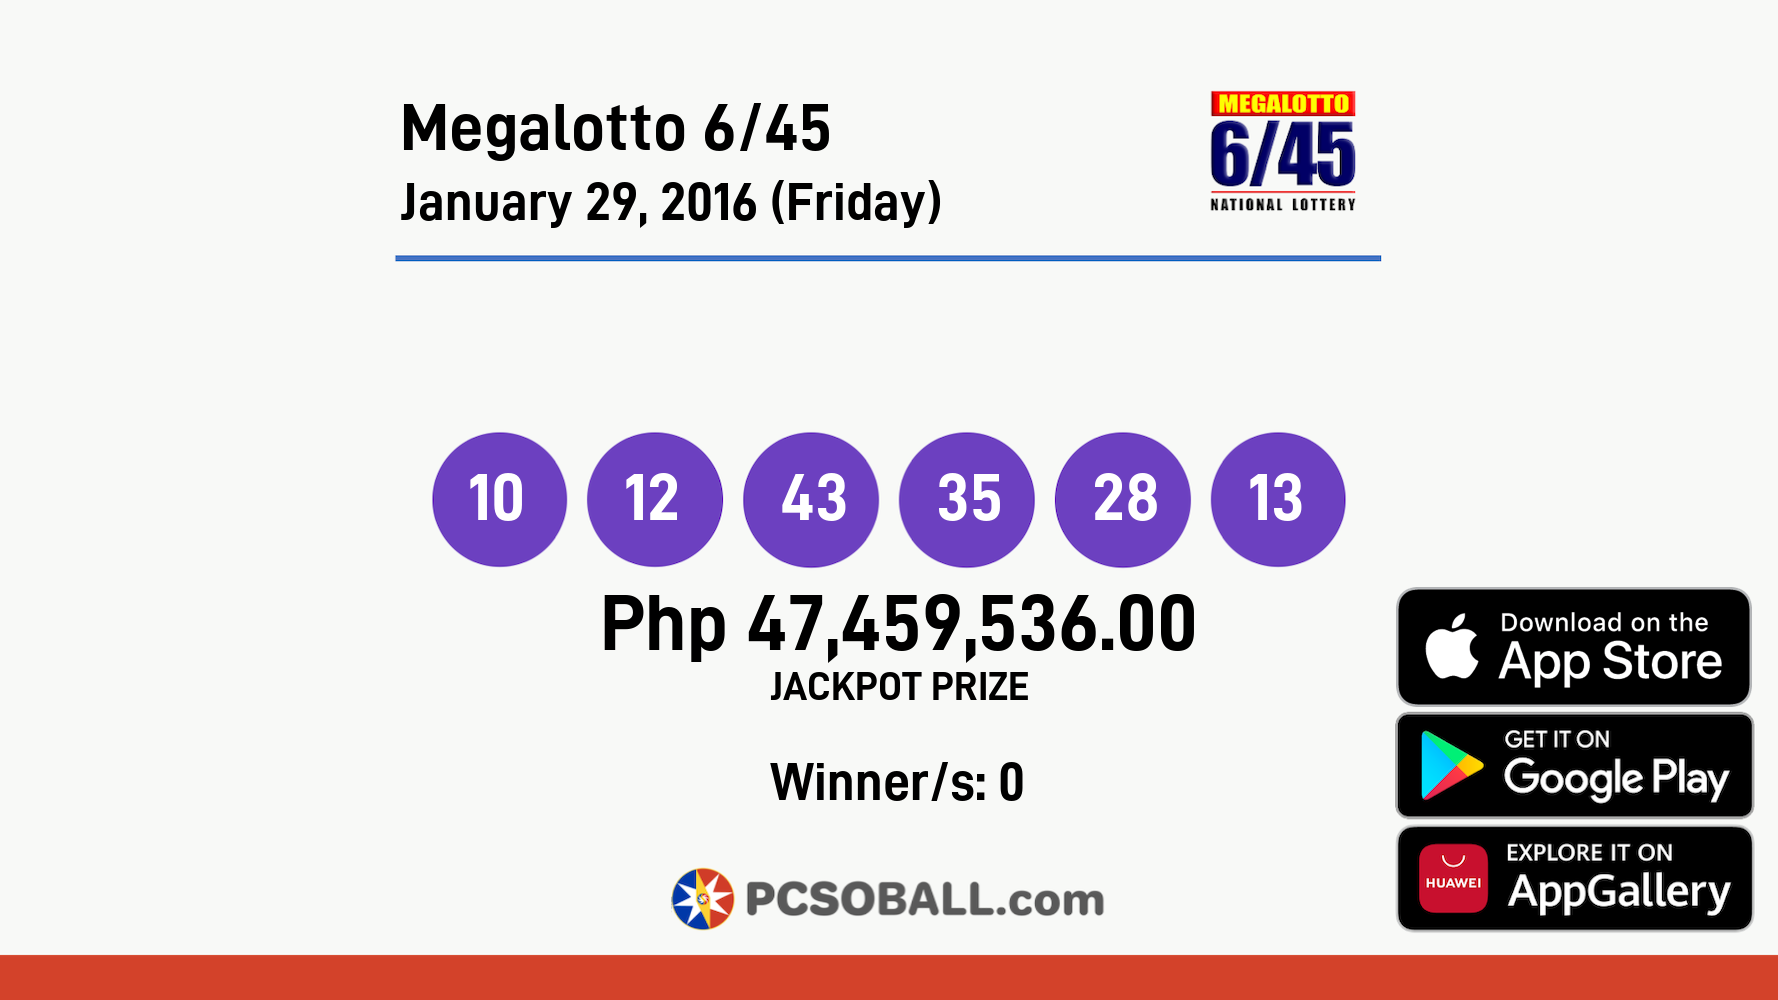 Megalotto 6/45 January 29, 2016 (Friday) Result